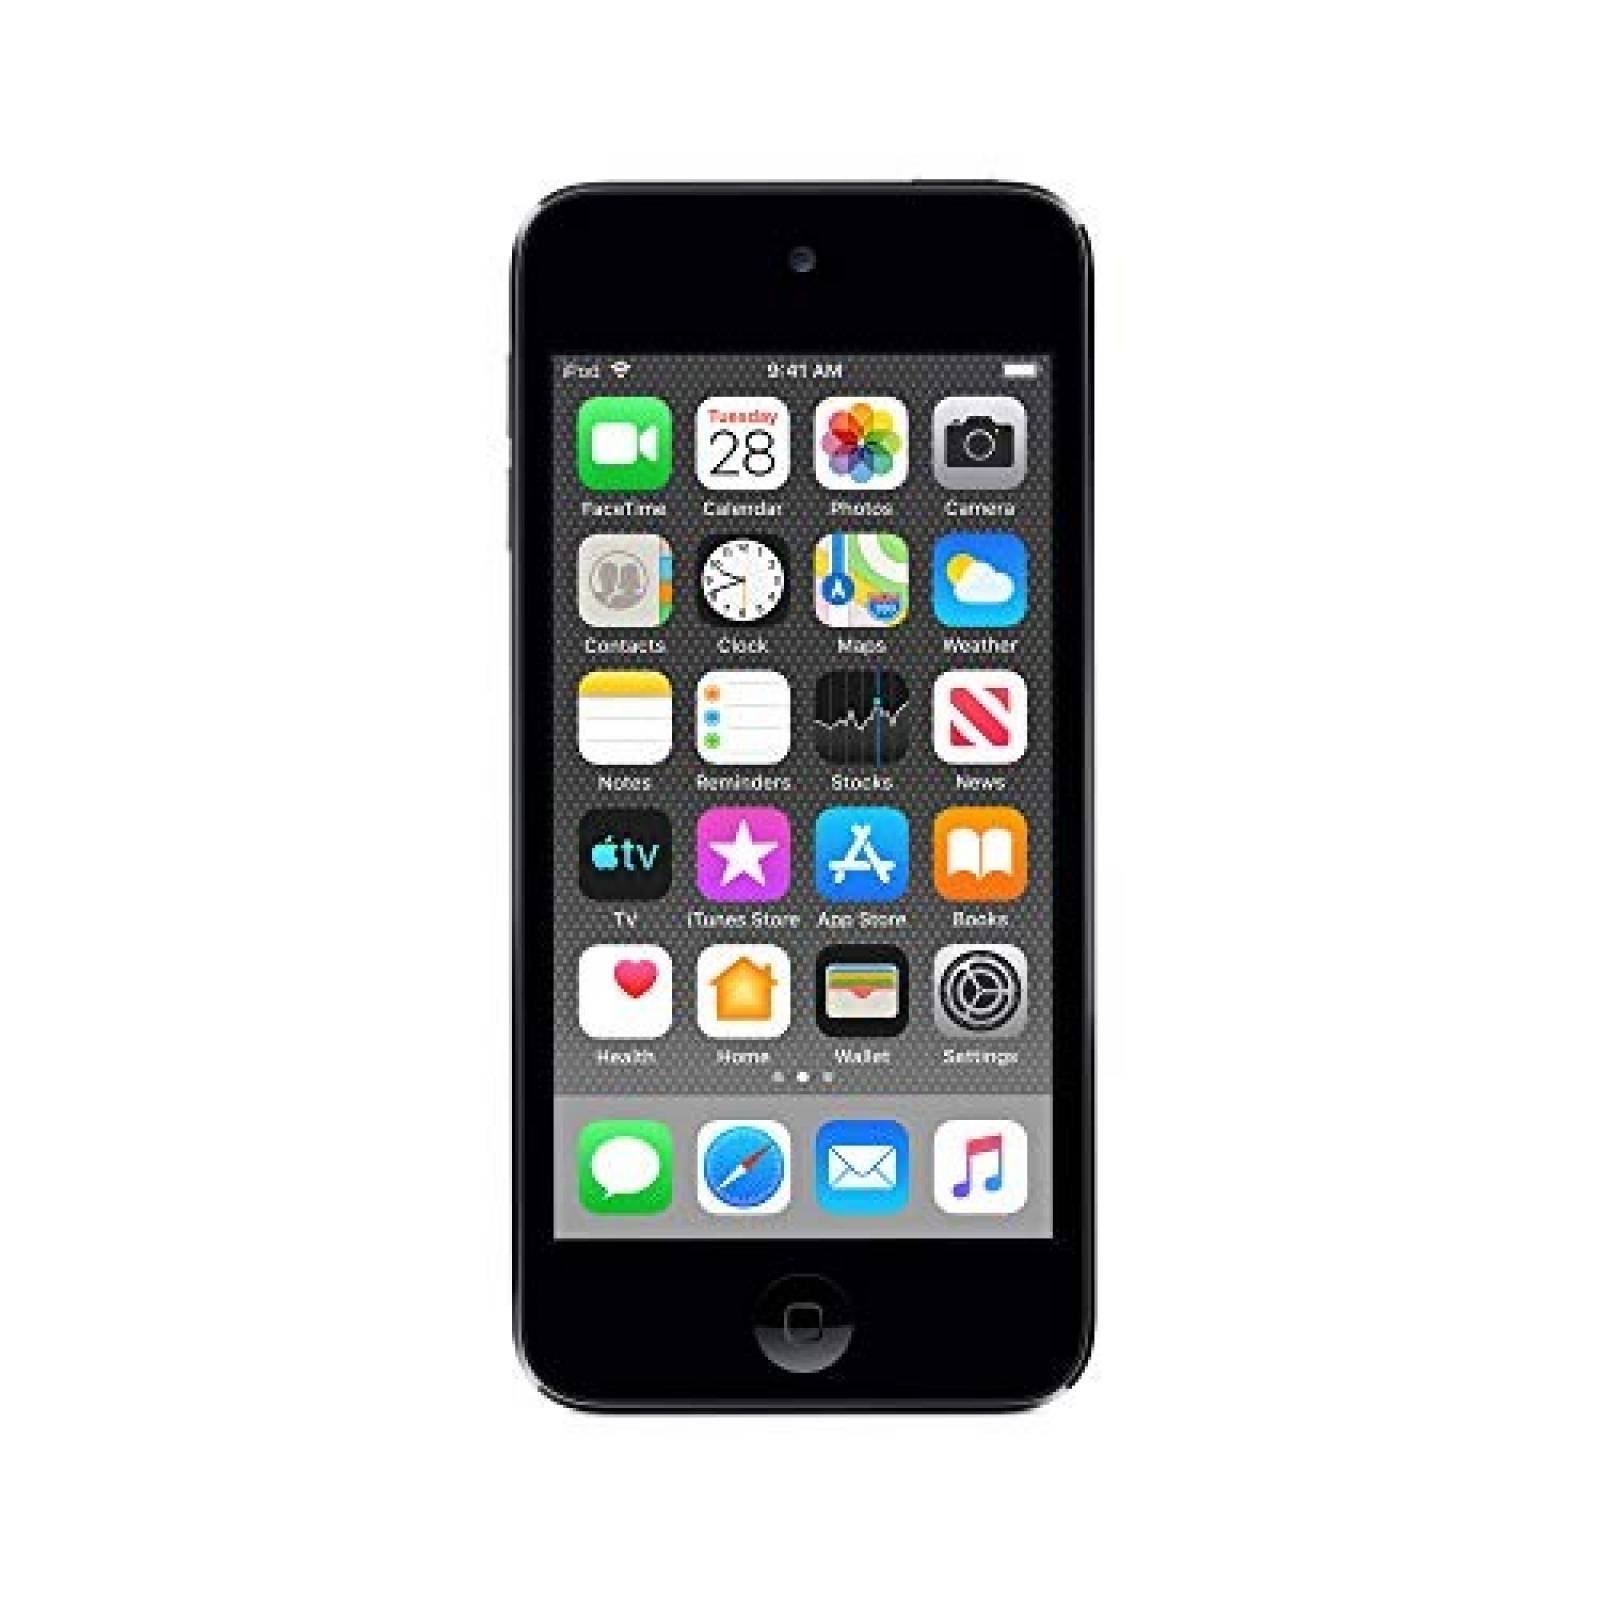 iPod Touch Apple 32 GB A10 Fusion Chip -Space Gray